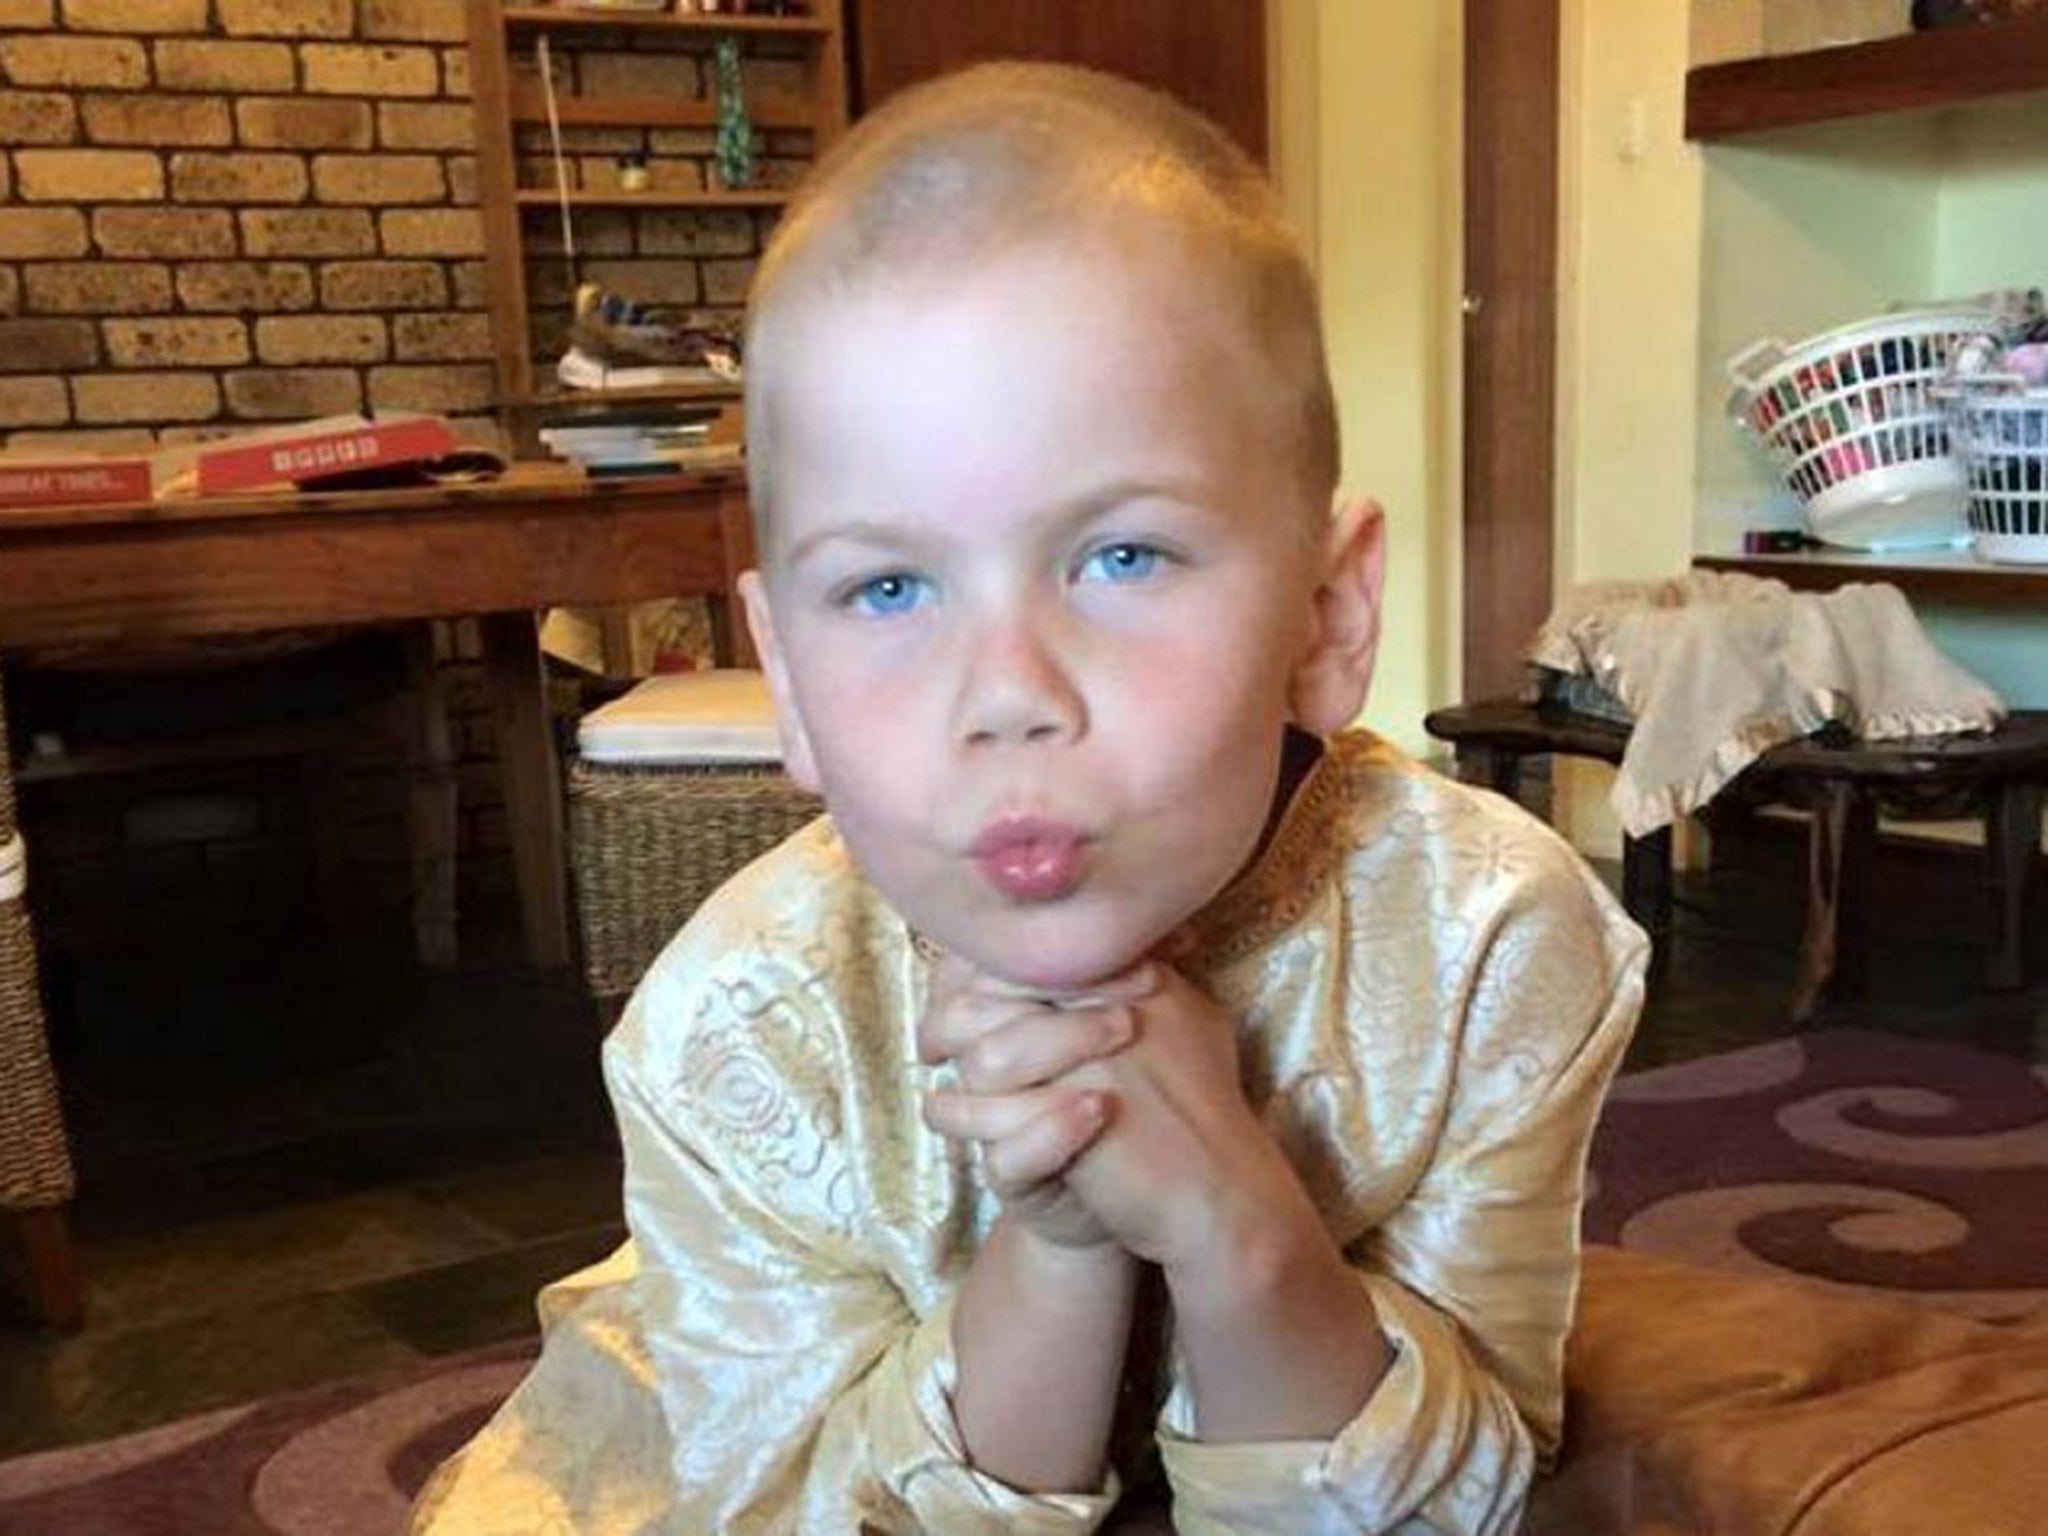 Oshin Kizsko was diagnosed with medulloblastoma last December and underwent surgery for it